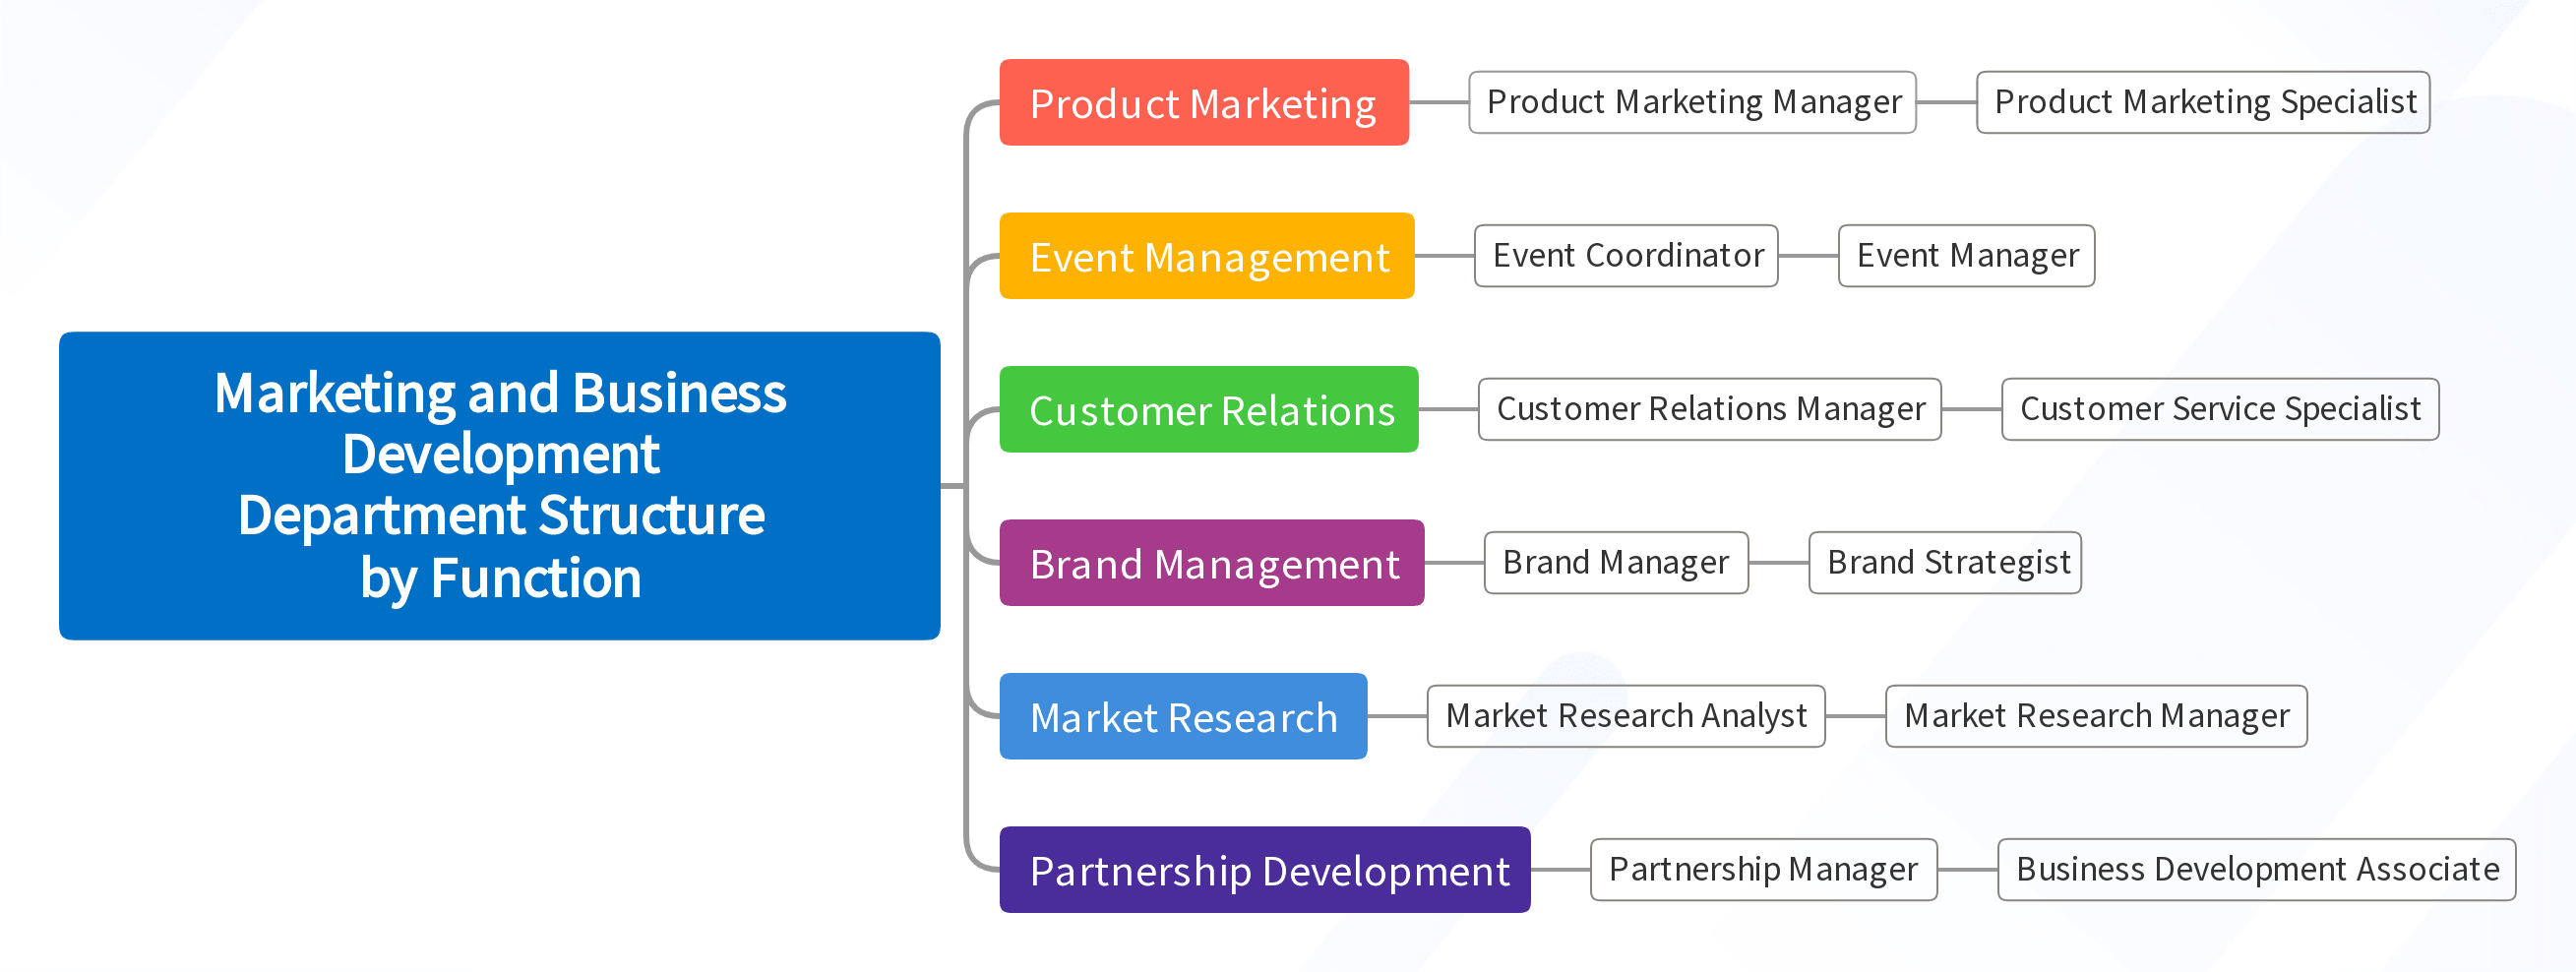 Marketing and Business Development Department Structure by Function